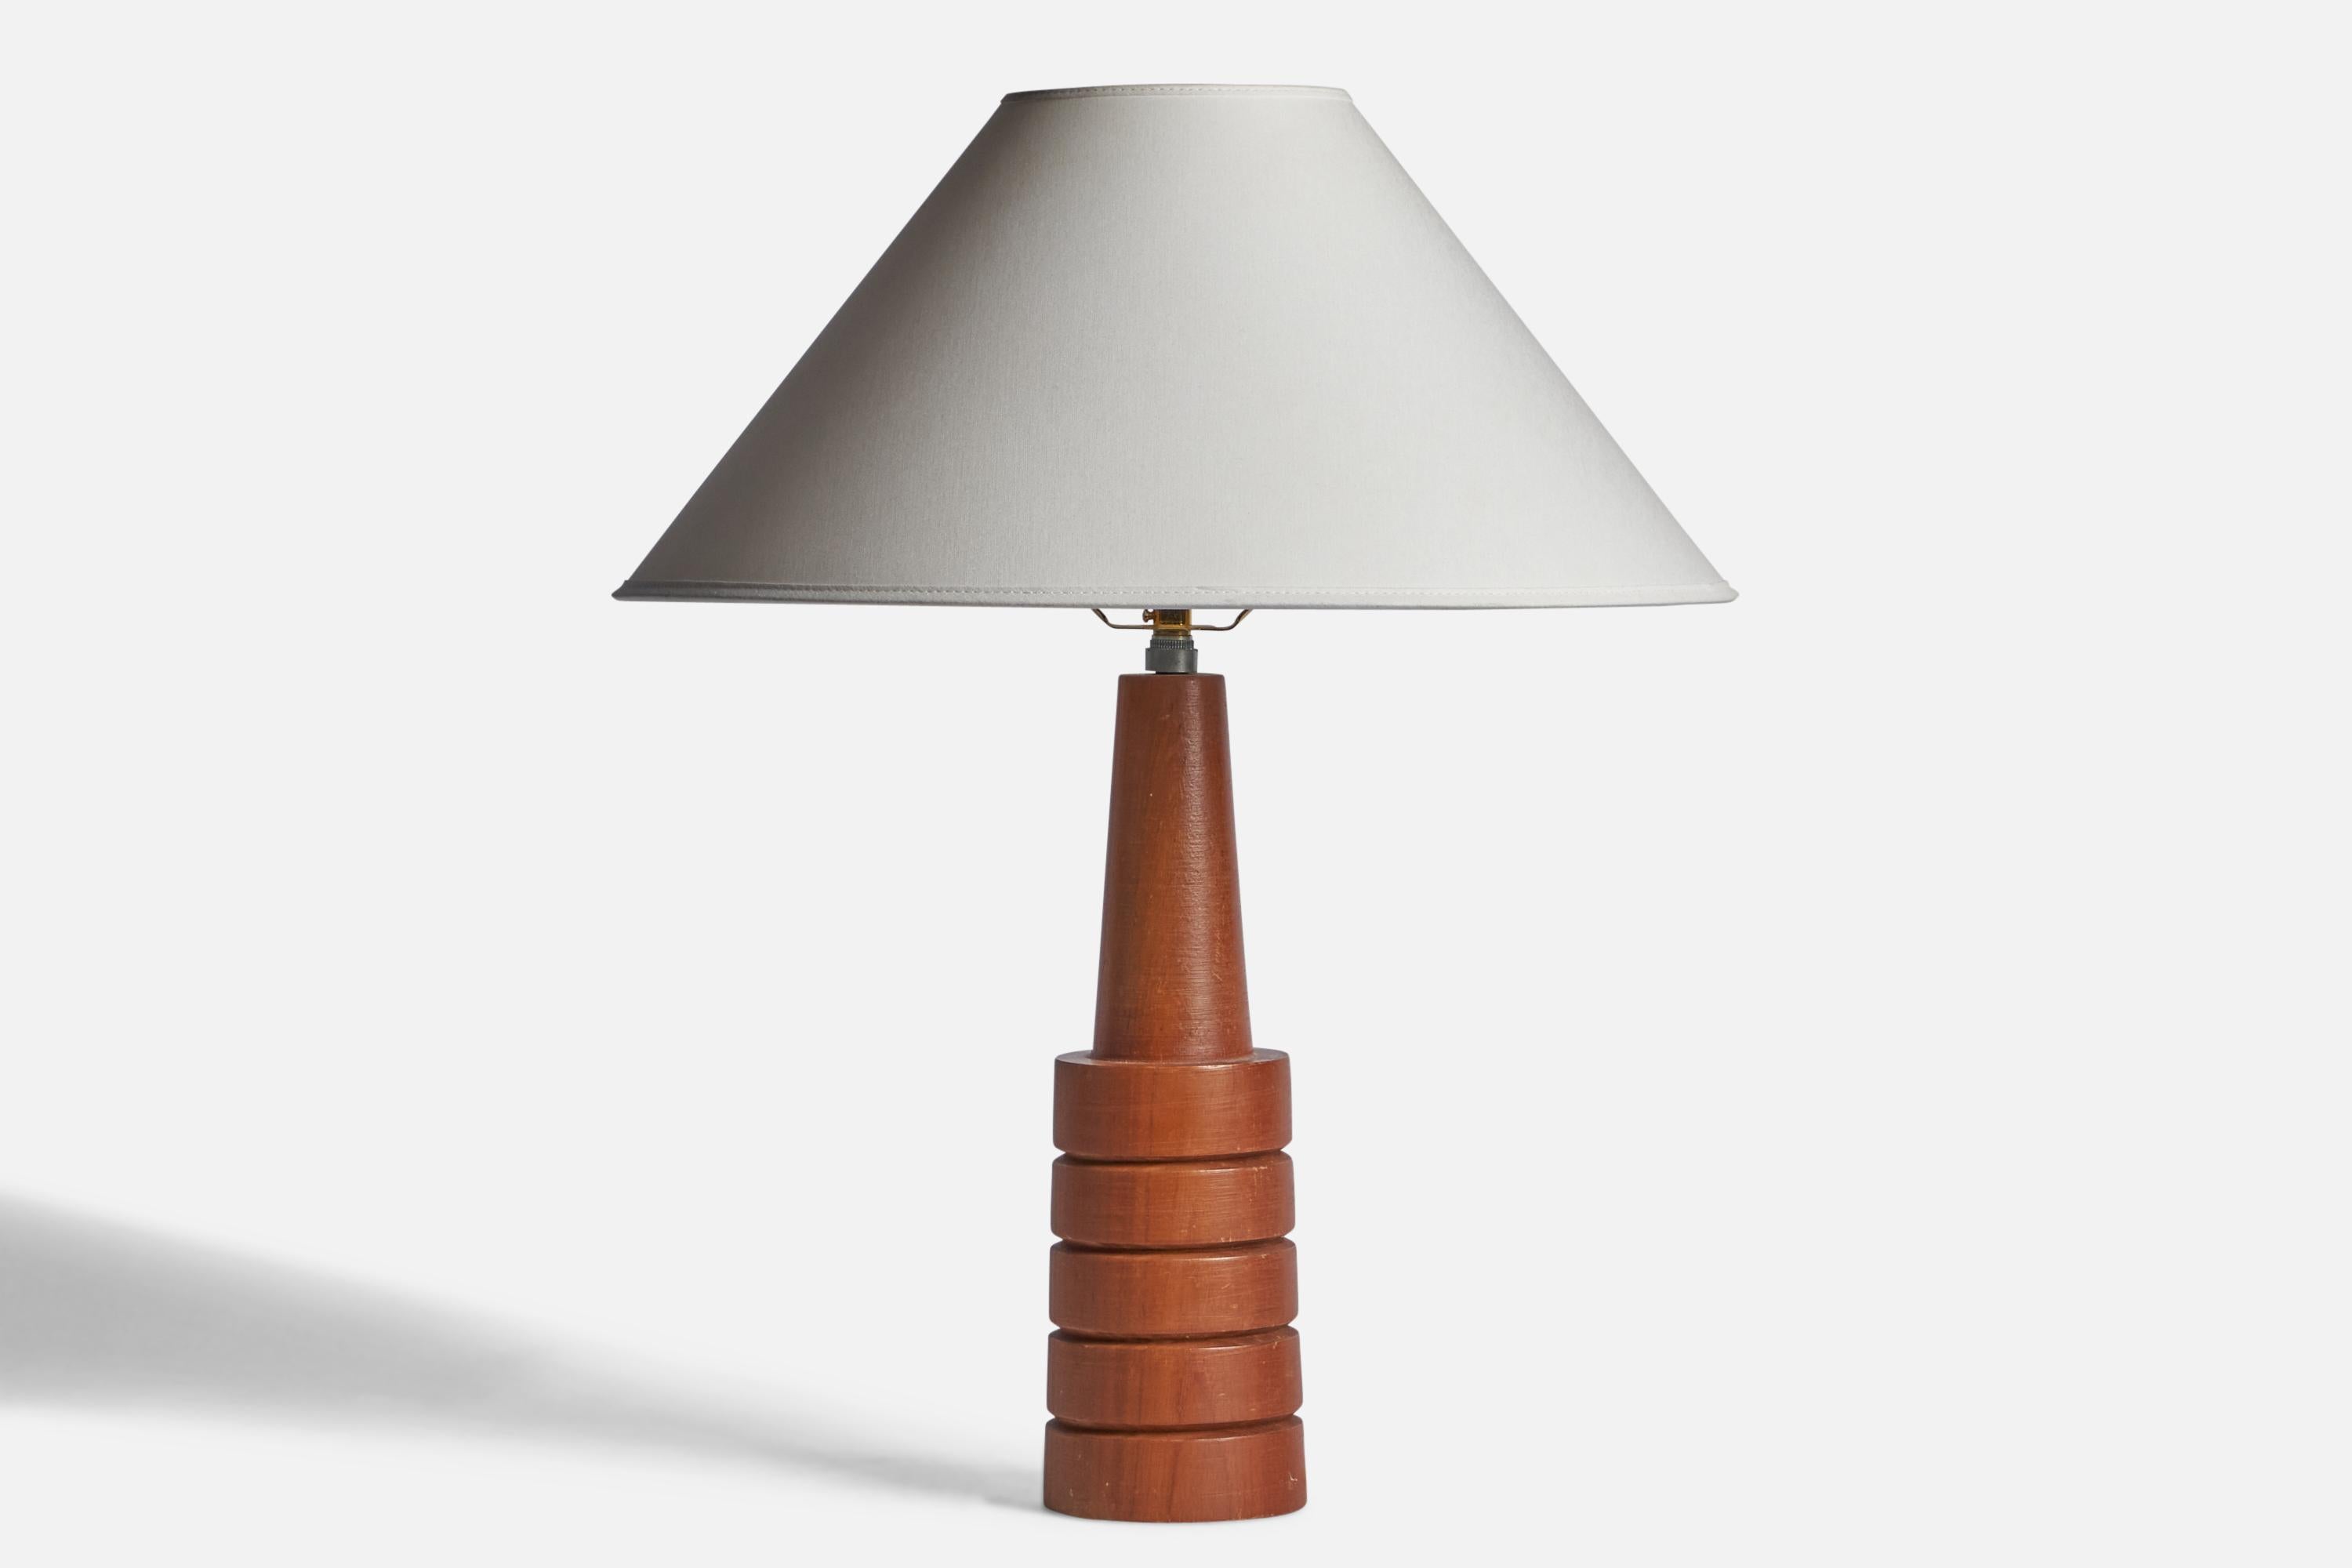 A teak table lamp designed and produced in the US, c. 1960s.

Dimensions of Lamp (inches): 15.25” H x 3.75” Diameter
Dimensions of Shade (inches): 4.5” Top Diameter x 16” Bottom Diameter x 7.15” H 
Dimensions of Lamp with Shade (inches): 19.75” H x